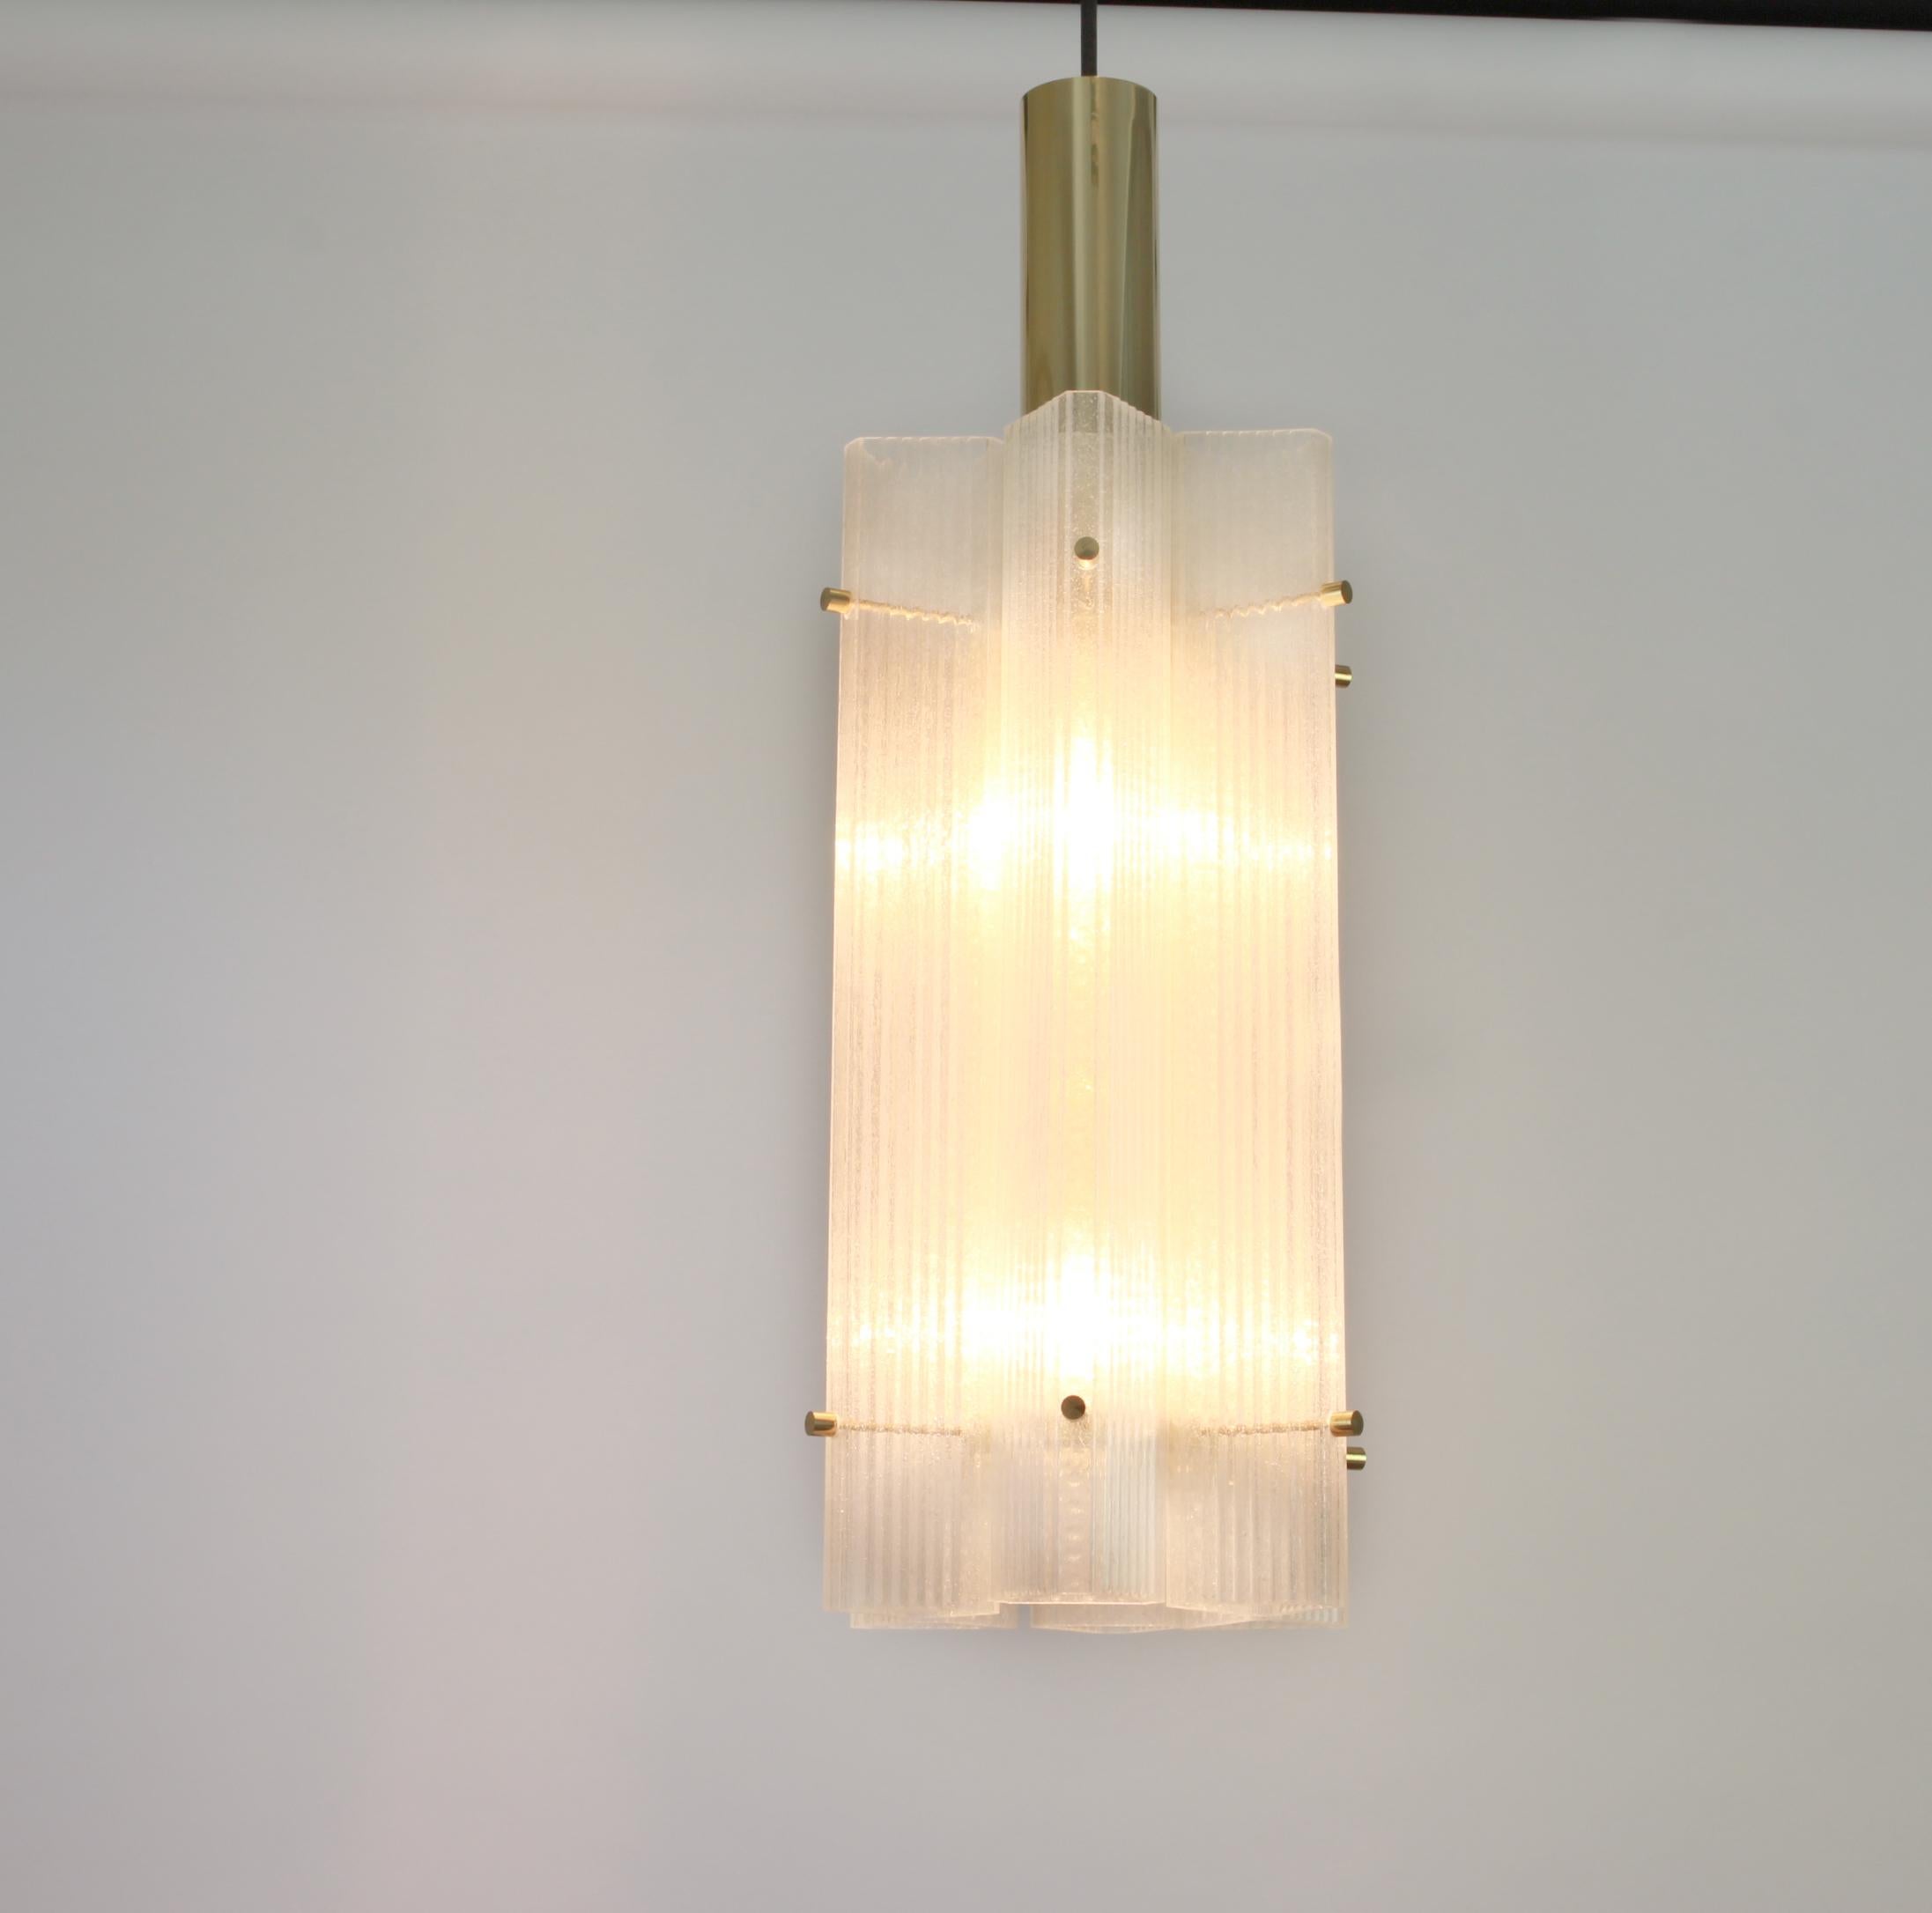 1 of 3 large Murano ice glass pendants by Limburg, Germany, 1970s.

6 glass elements on a brass frame with 2 x E27 standard bulbs .
Wonderful design.

Measures: Diameter 22 cm / 8.66 inch
Height( total): 100 cm // 39.37 inch
The height can be